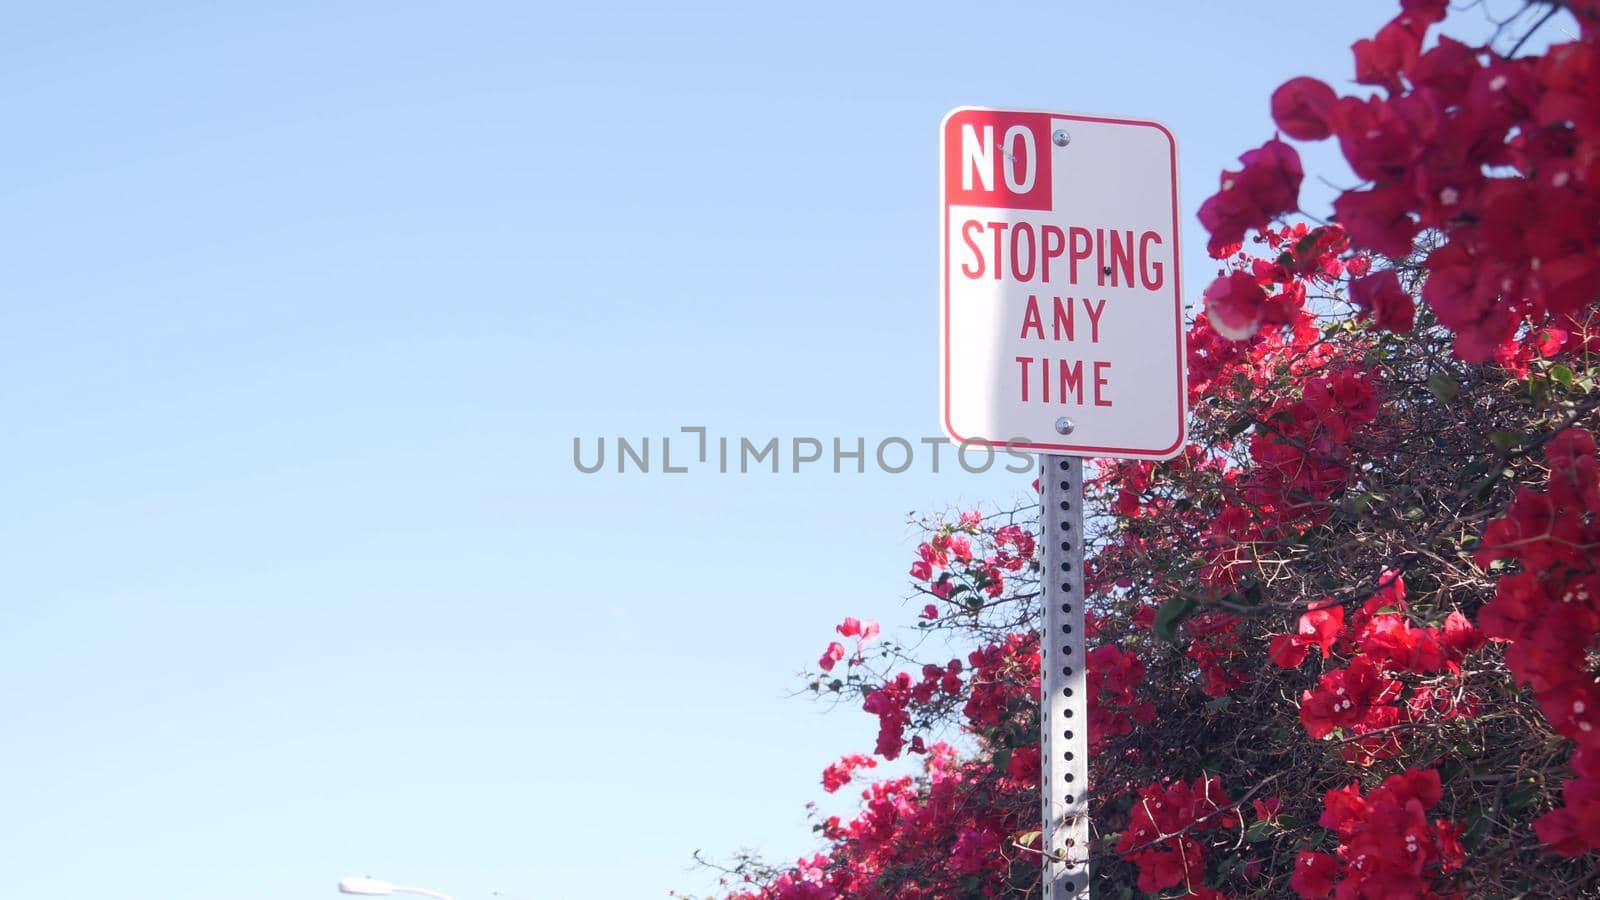 No stopping any time road sign on roadside, California city street, USA. Red flowers of bougainvillea plant, crimson floral blossom or bloom, blue sky. No parking traffic signage in America. Road trip